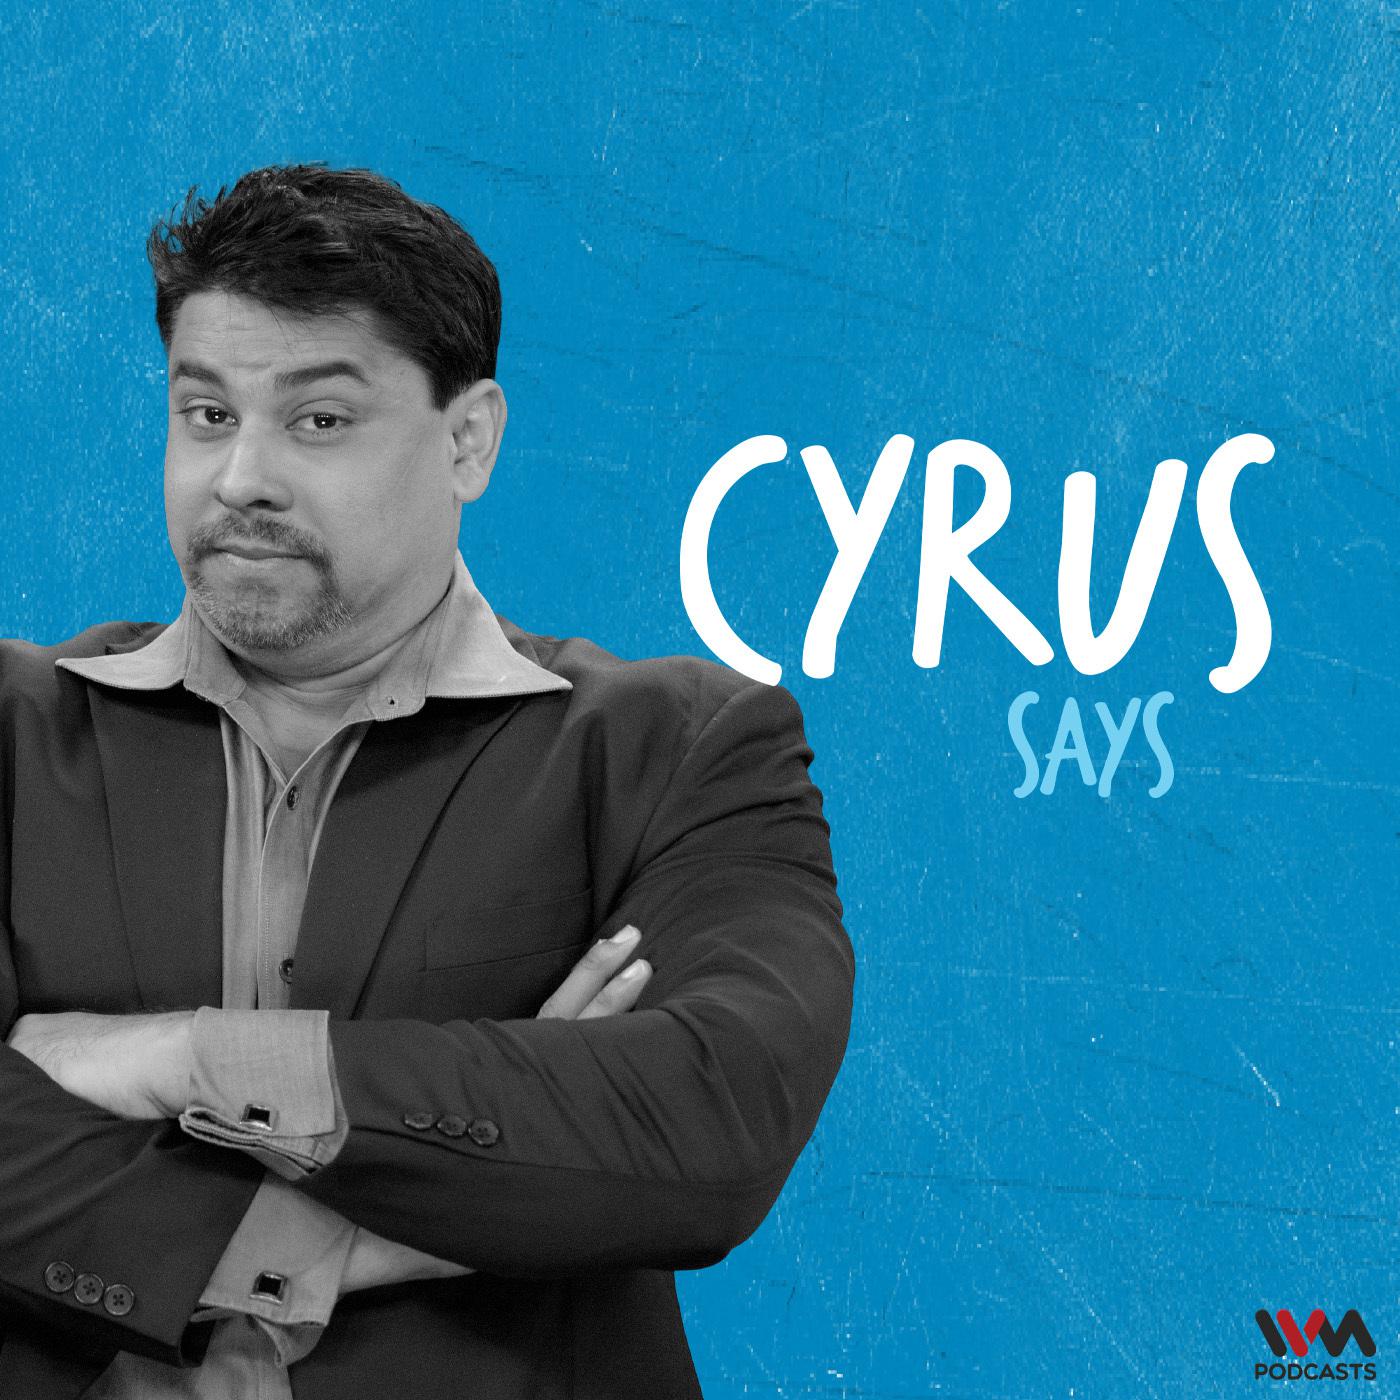 Cyrus Says:IVM Podcasts